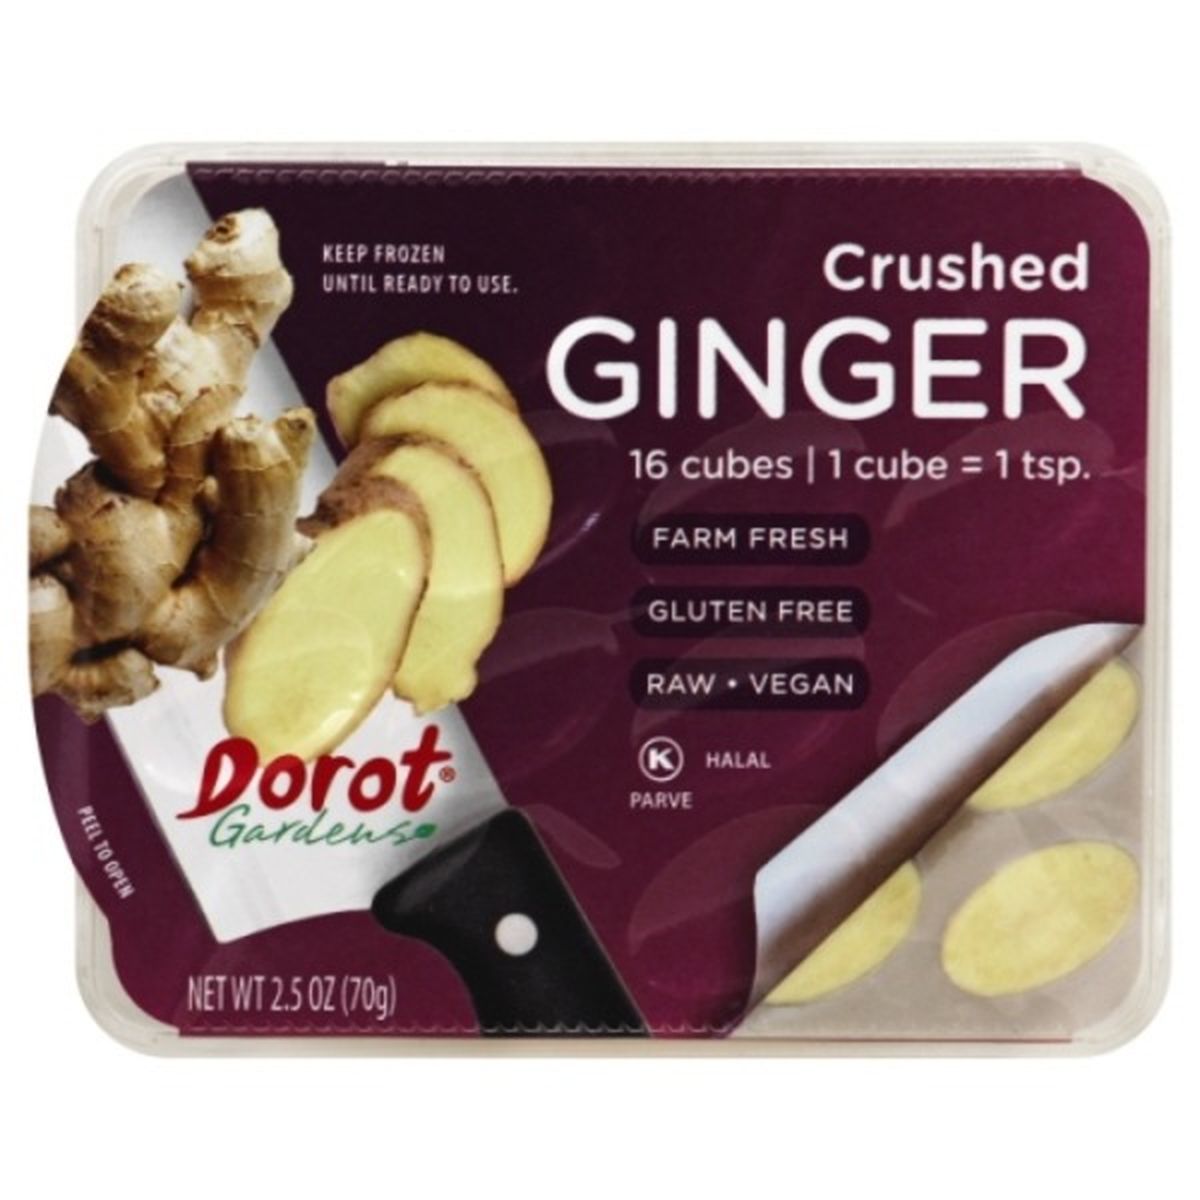 Calories in Dorot Ginger, Crushed